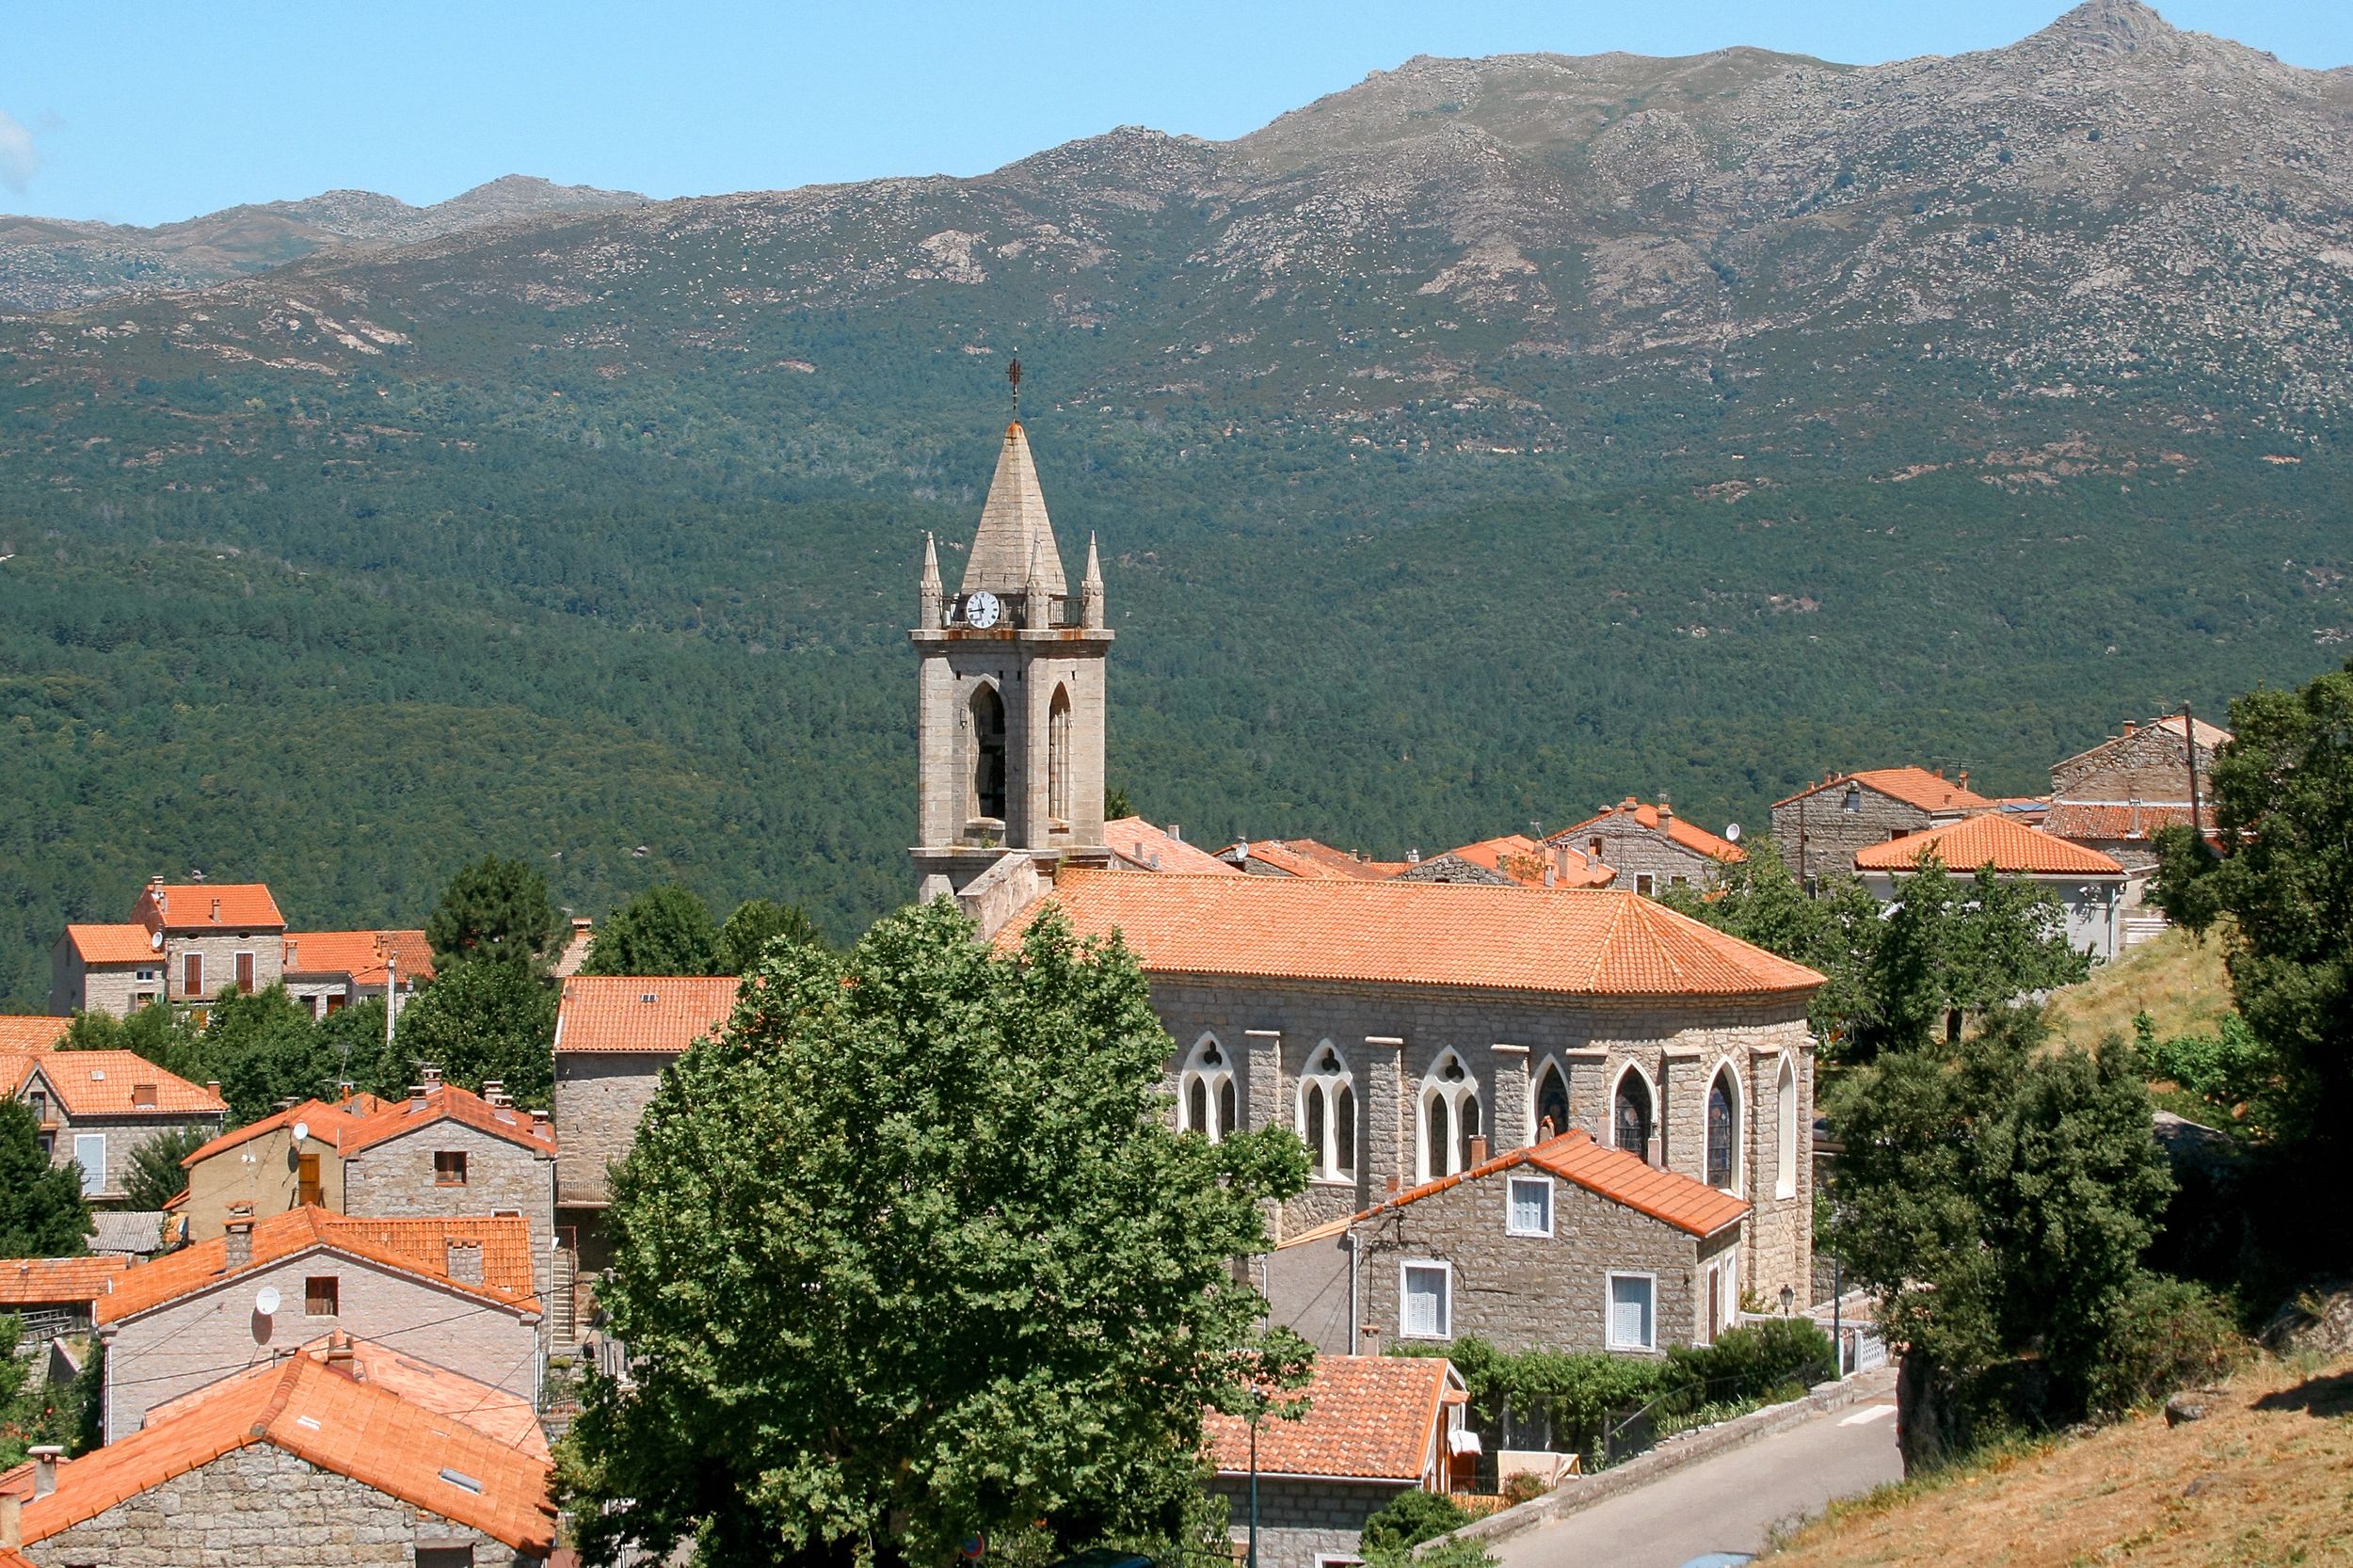 Visit the village of Zonza from our 4-star residence in Porto-Vecchio